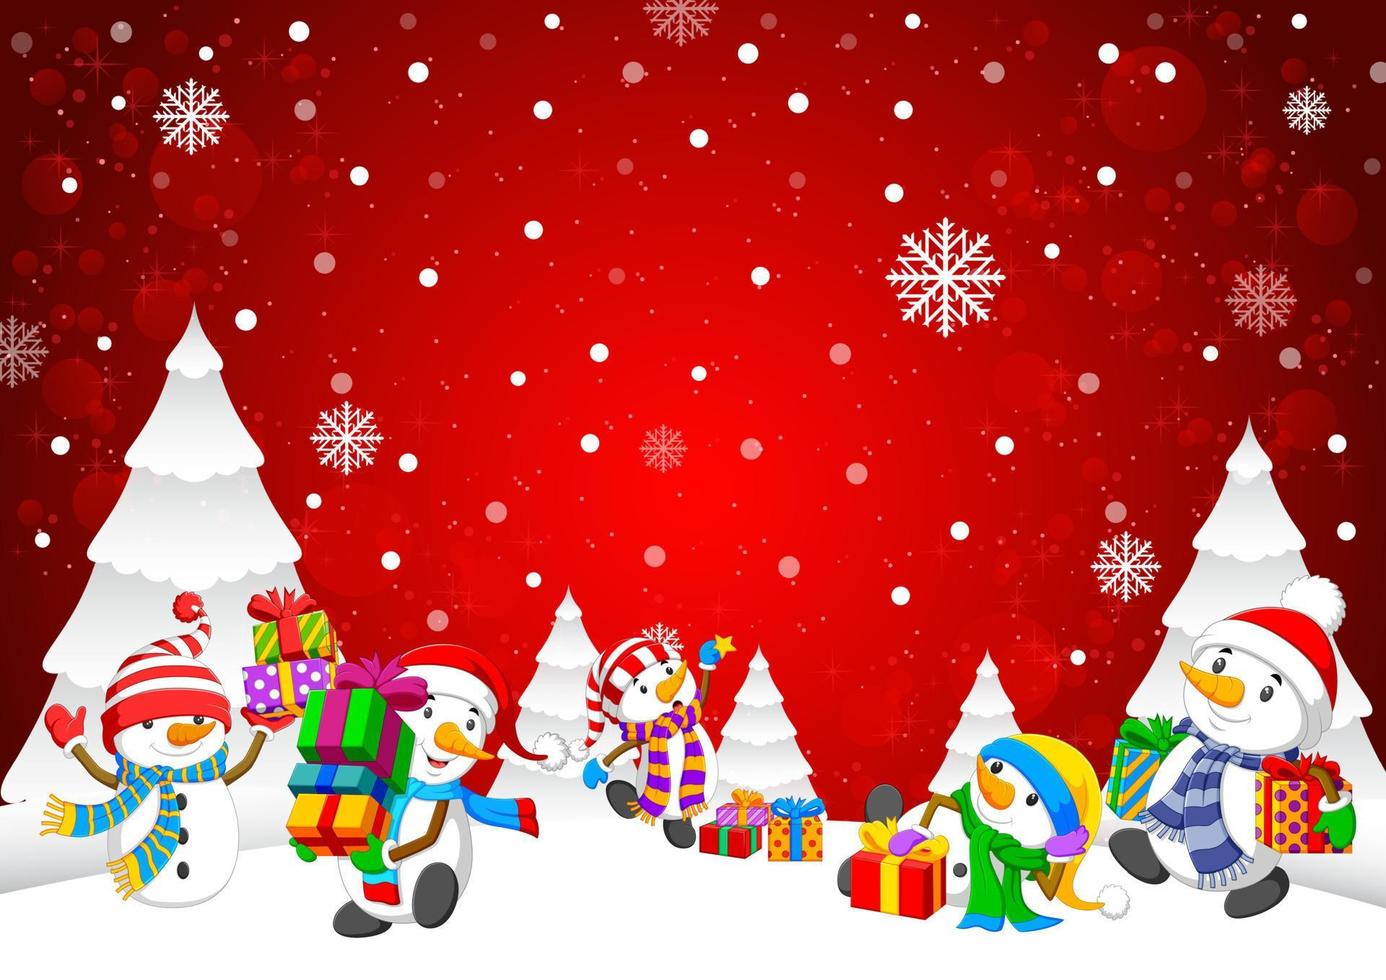 Winter Christmas Background with snowman and Gift Boxes vector